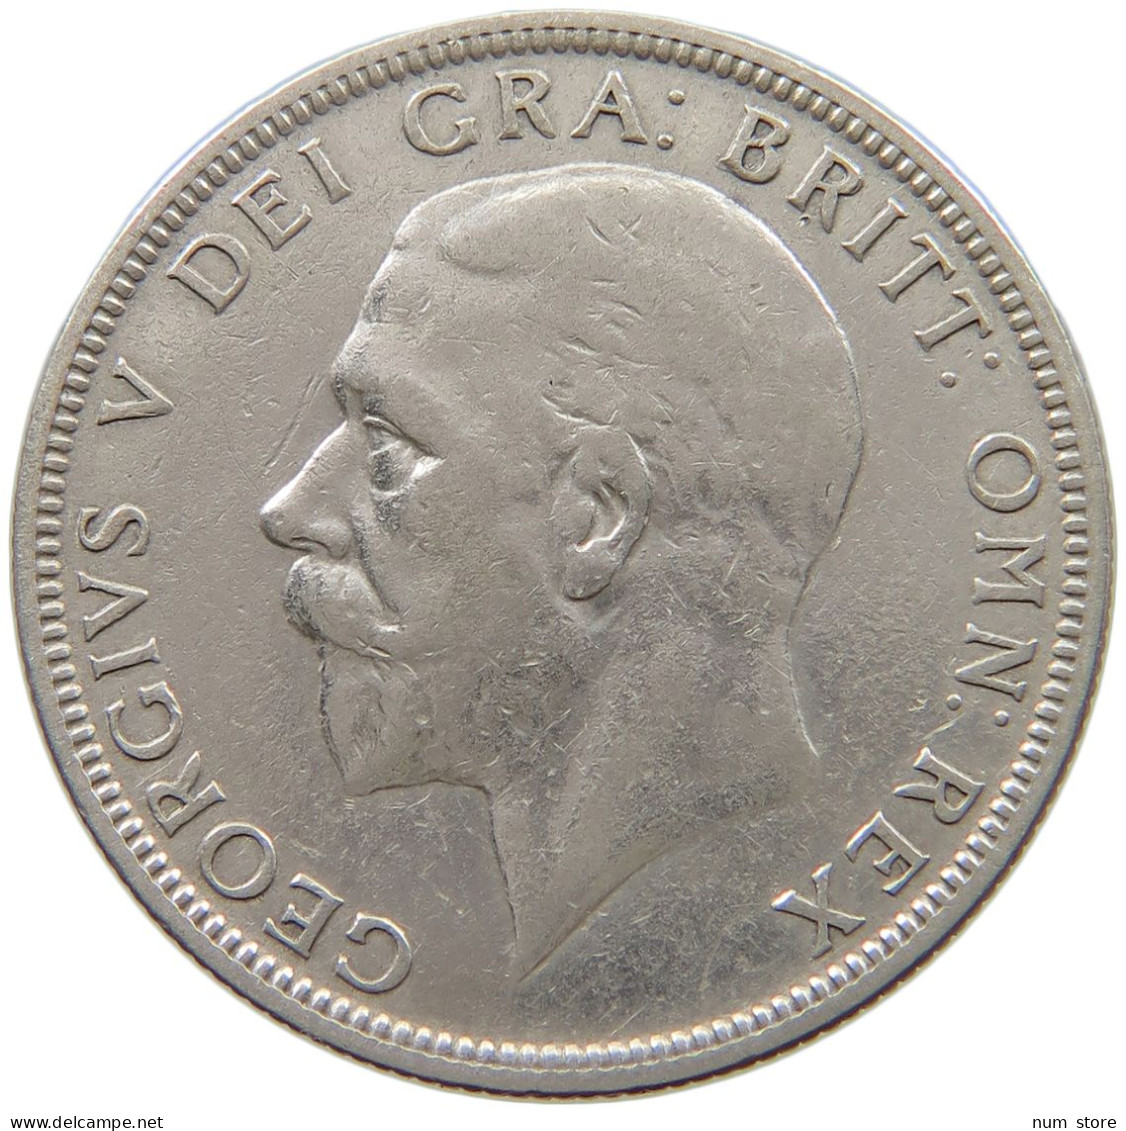 GREAT BRITAIN FLORIN 1928 George V. (1910-1936) #a090 0693 - J. 1 Florin / 2 Schillings